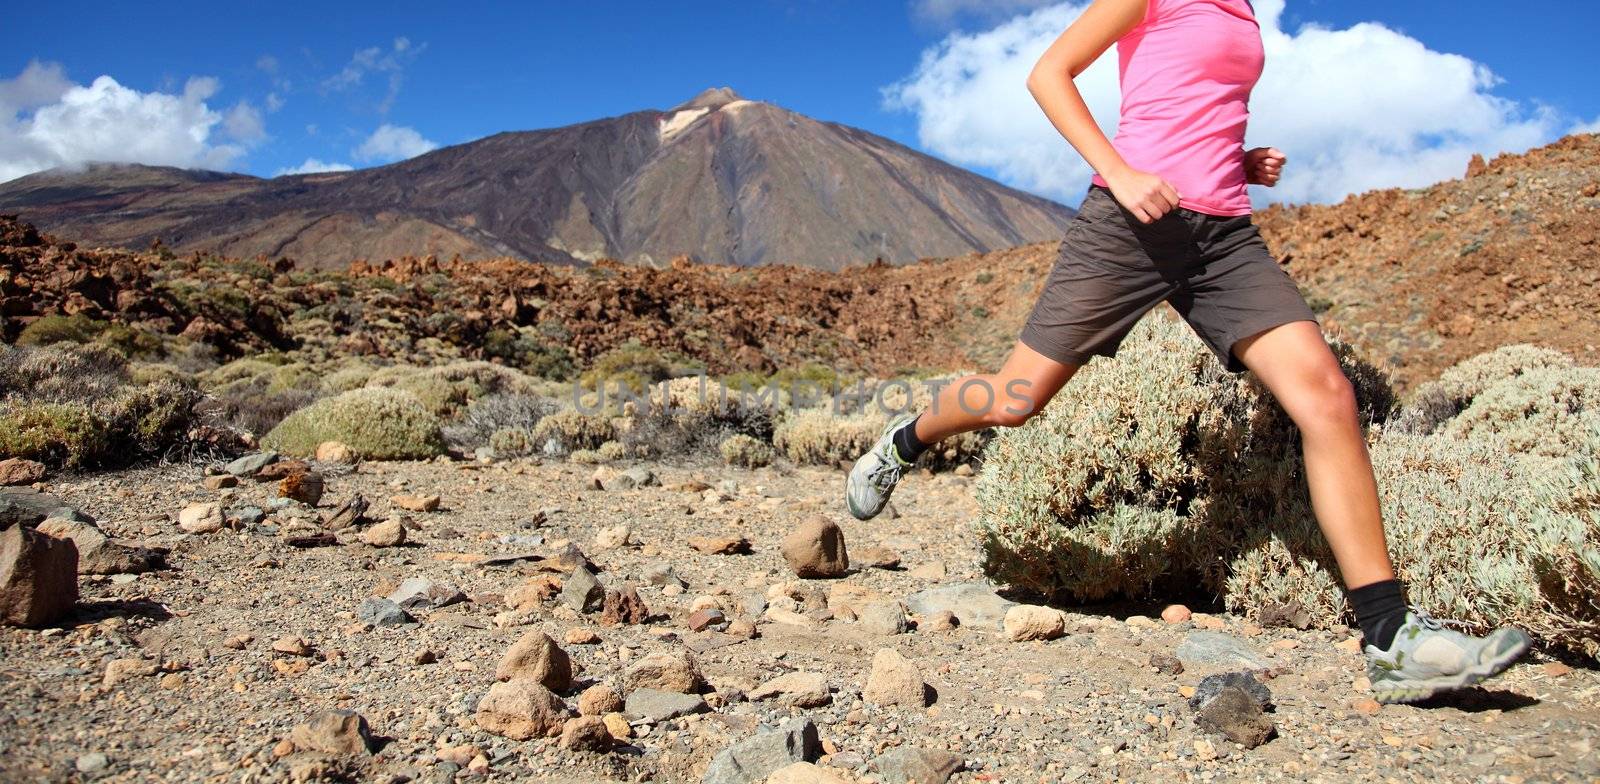 Running in spectacular volcano landscape on Teide, Tenerife. Woman in pink top.